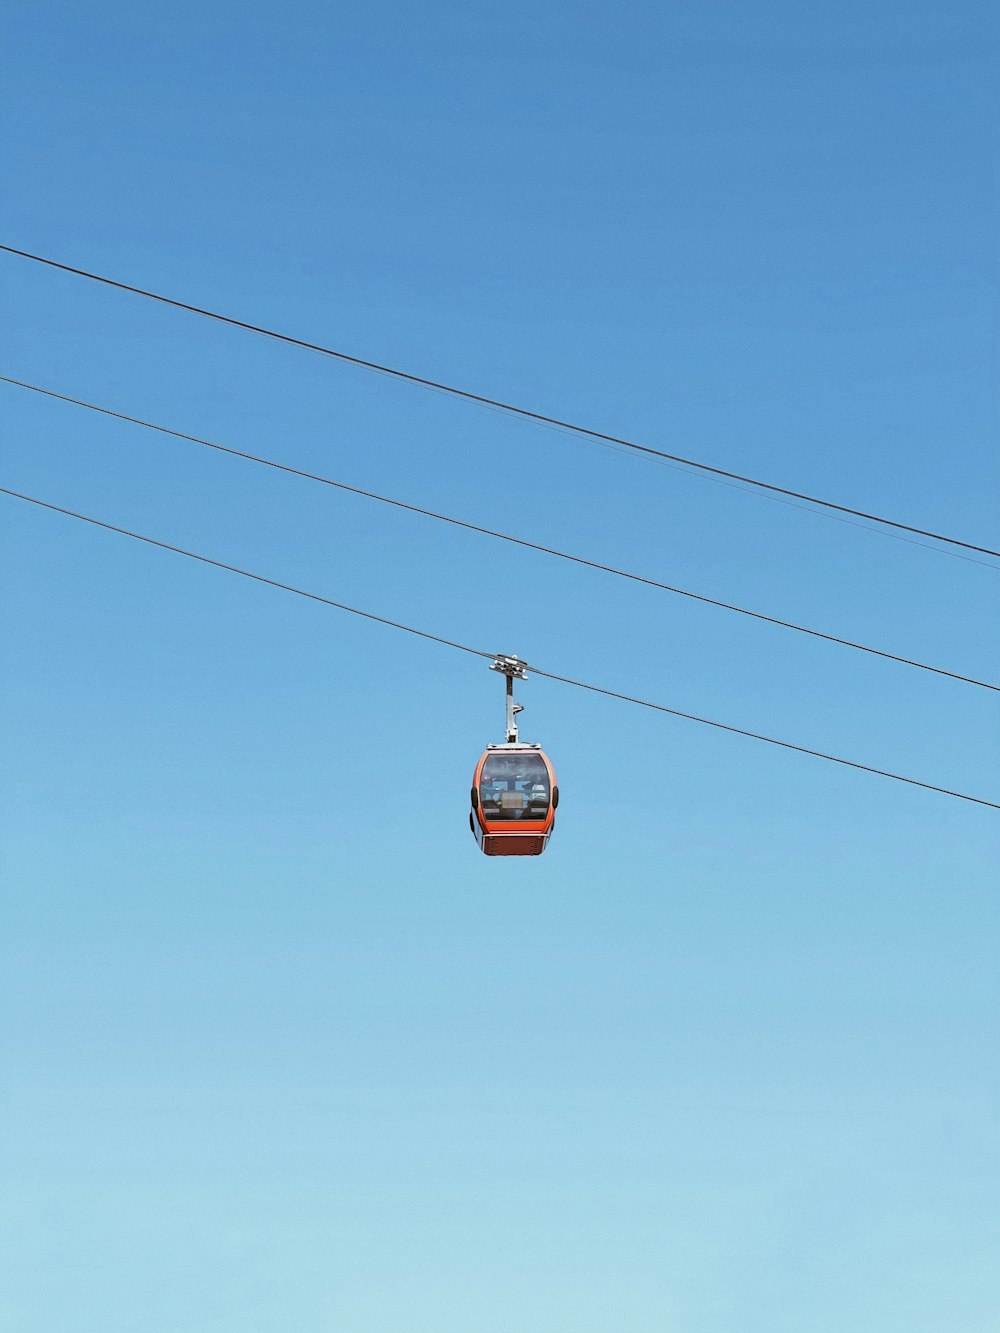 red cable car under blue sky during daytime